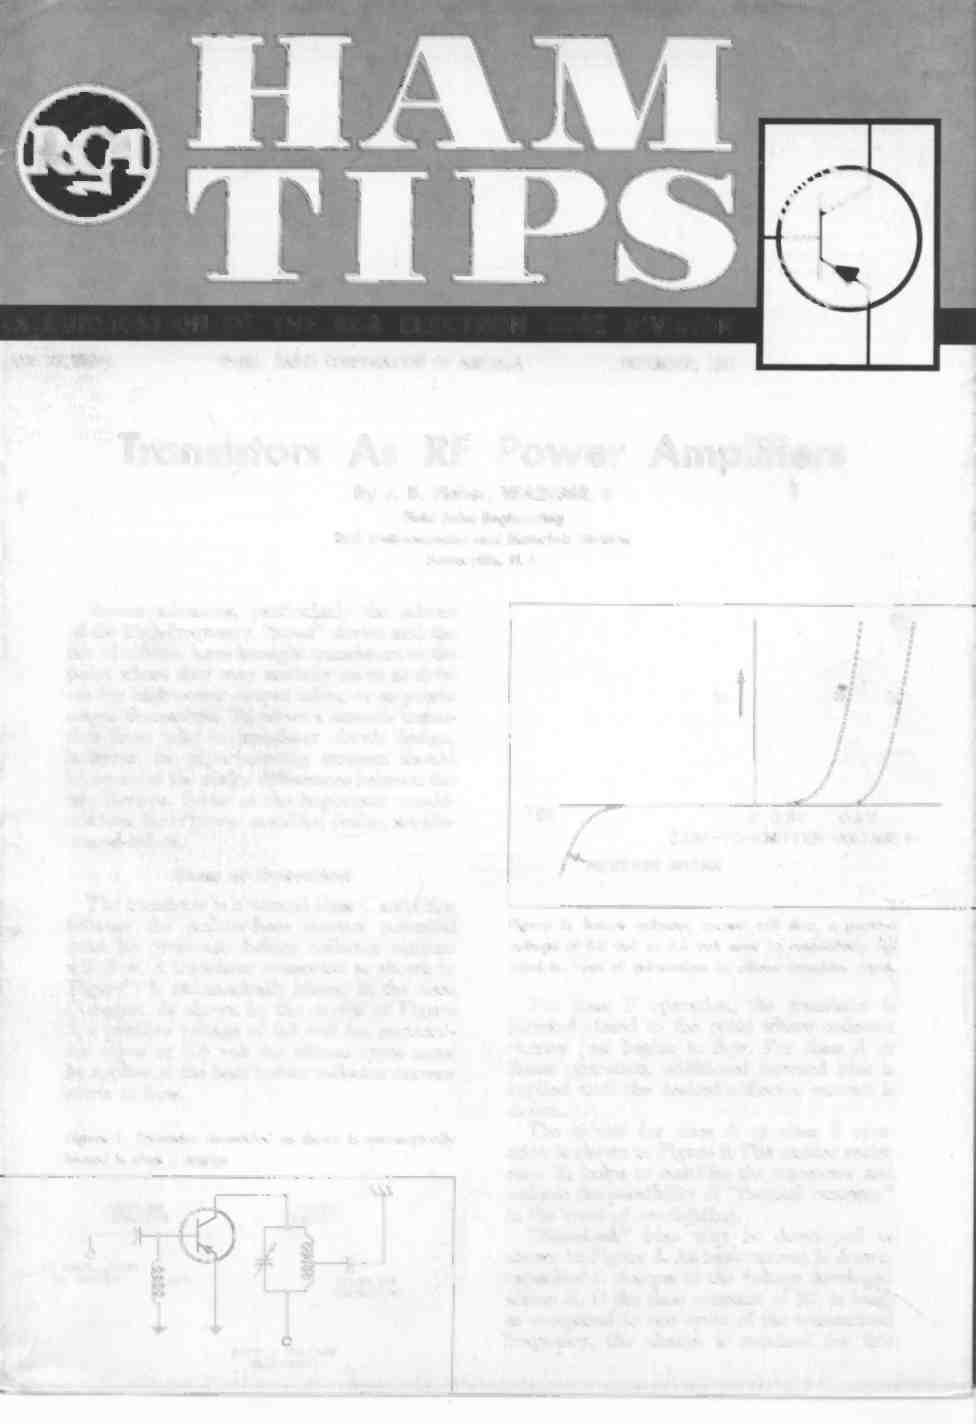 A PUBLICATION OF THE RCA ELECTRON TUBE DIVISION VOL. 21, NO. 4 1961, RADIO CORPORATION OF AMERICA DECEMBER, 1961 Transistors As RF Power Amplifiers By